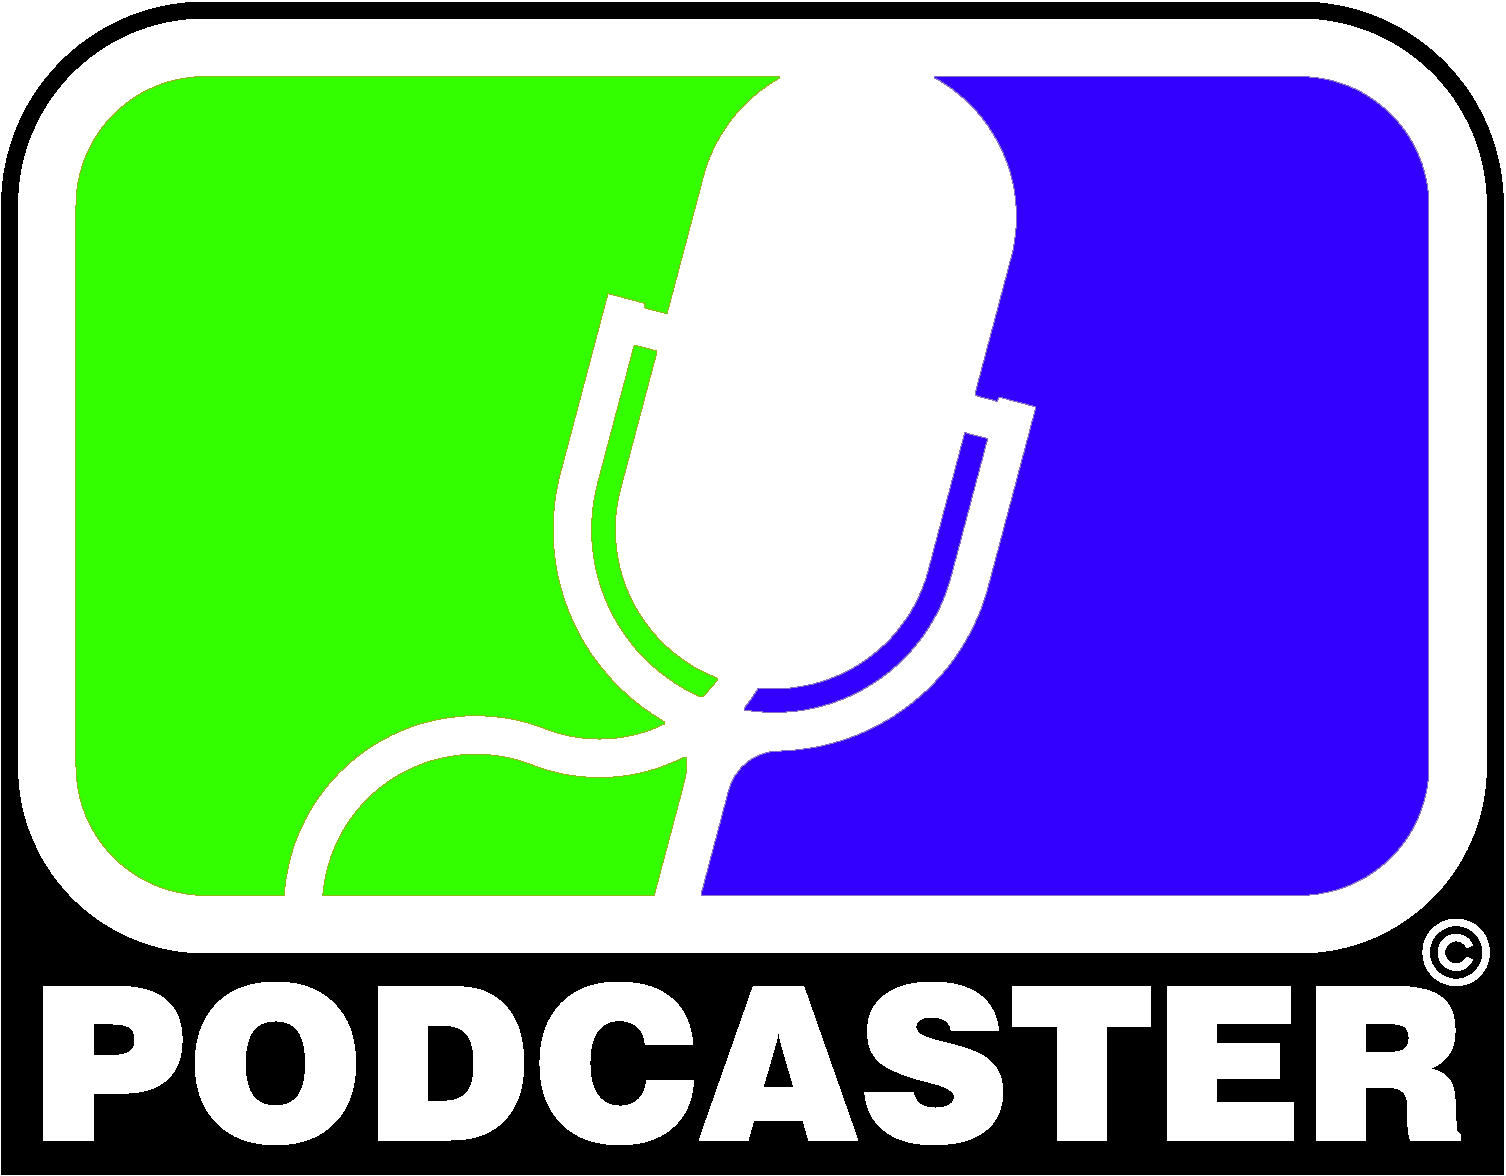 Green and Blue Logo - Podcaster Badges